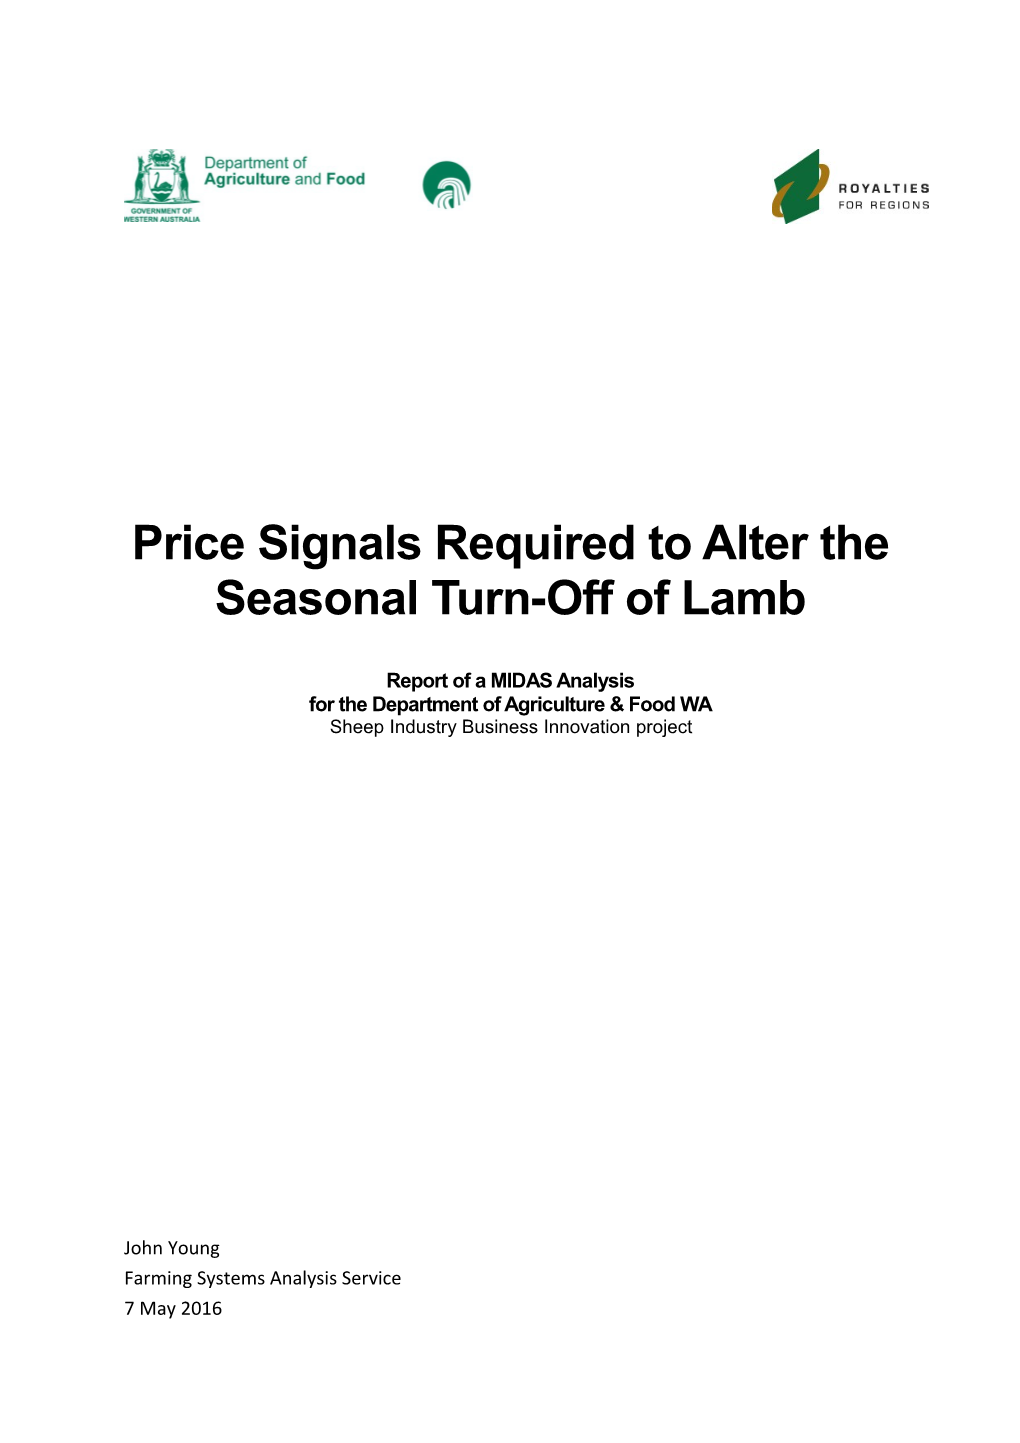 Price Signals Required to Alter the Seasonal Turn-Off of Lamb